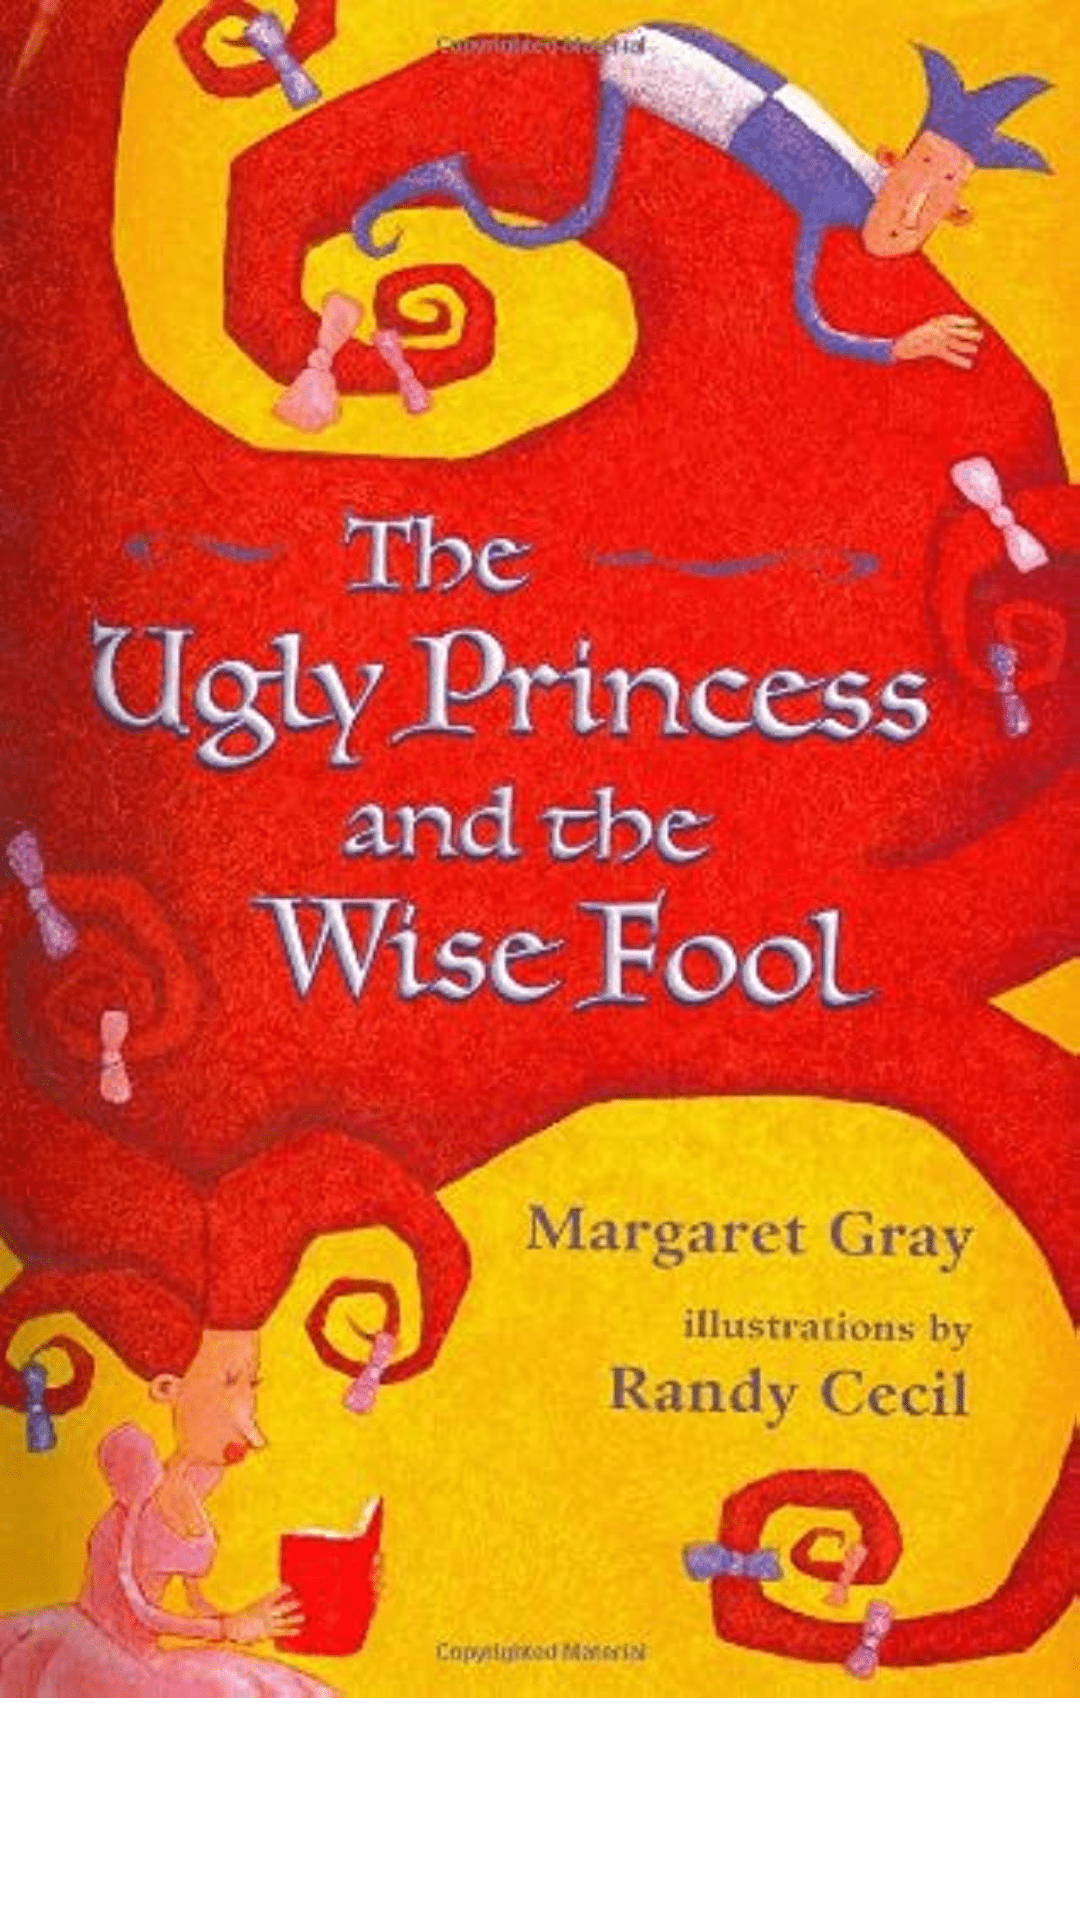 The Ugly Princess and the Wise Fool